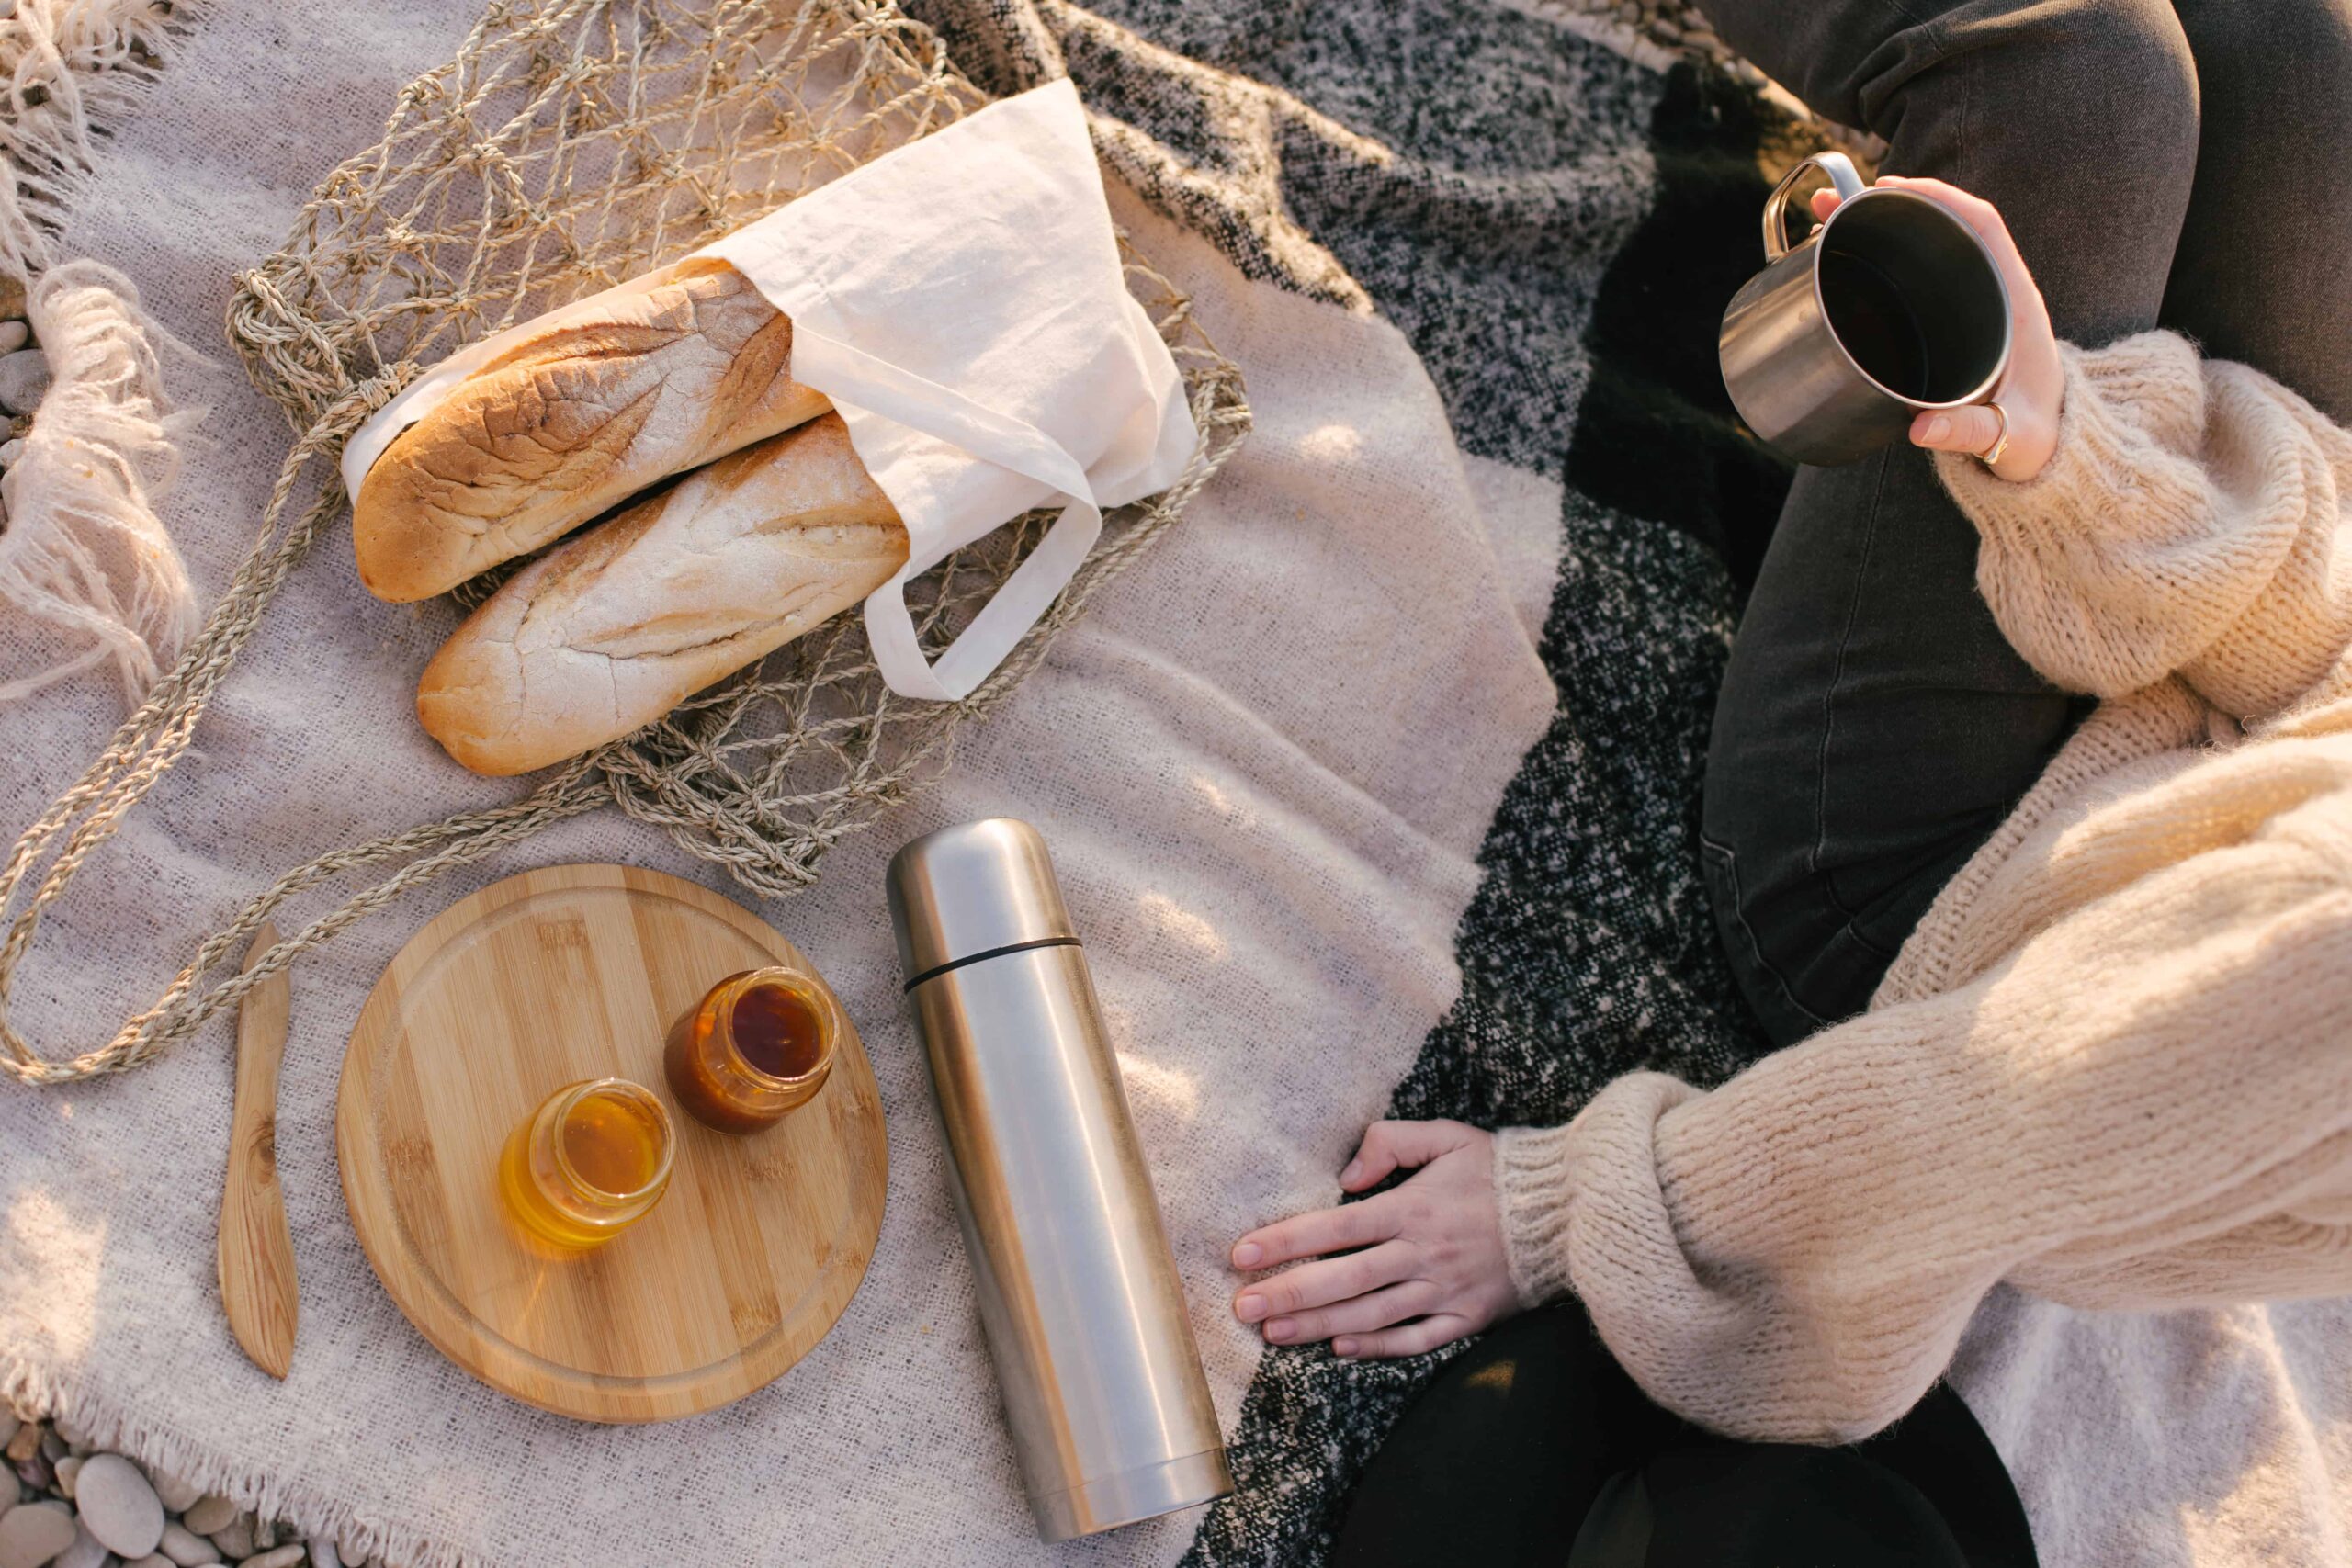 How to Pack a Plastic-Free Picnic